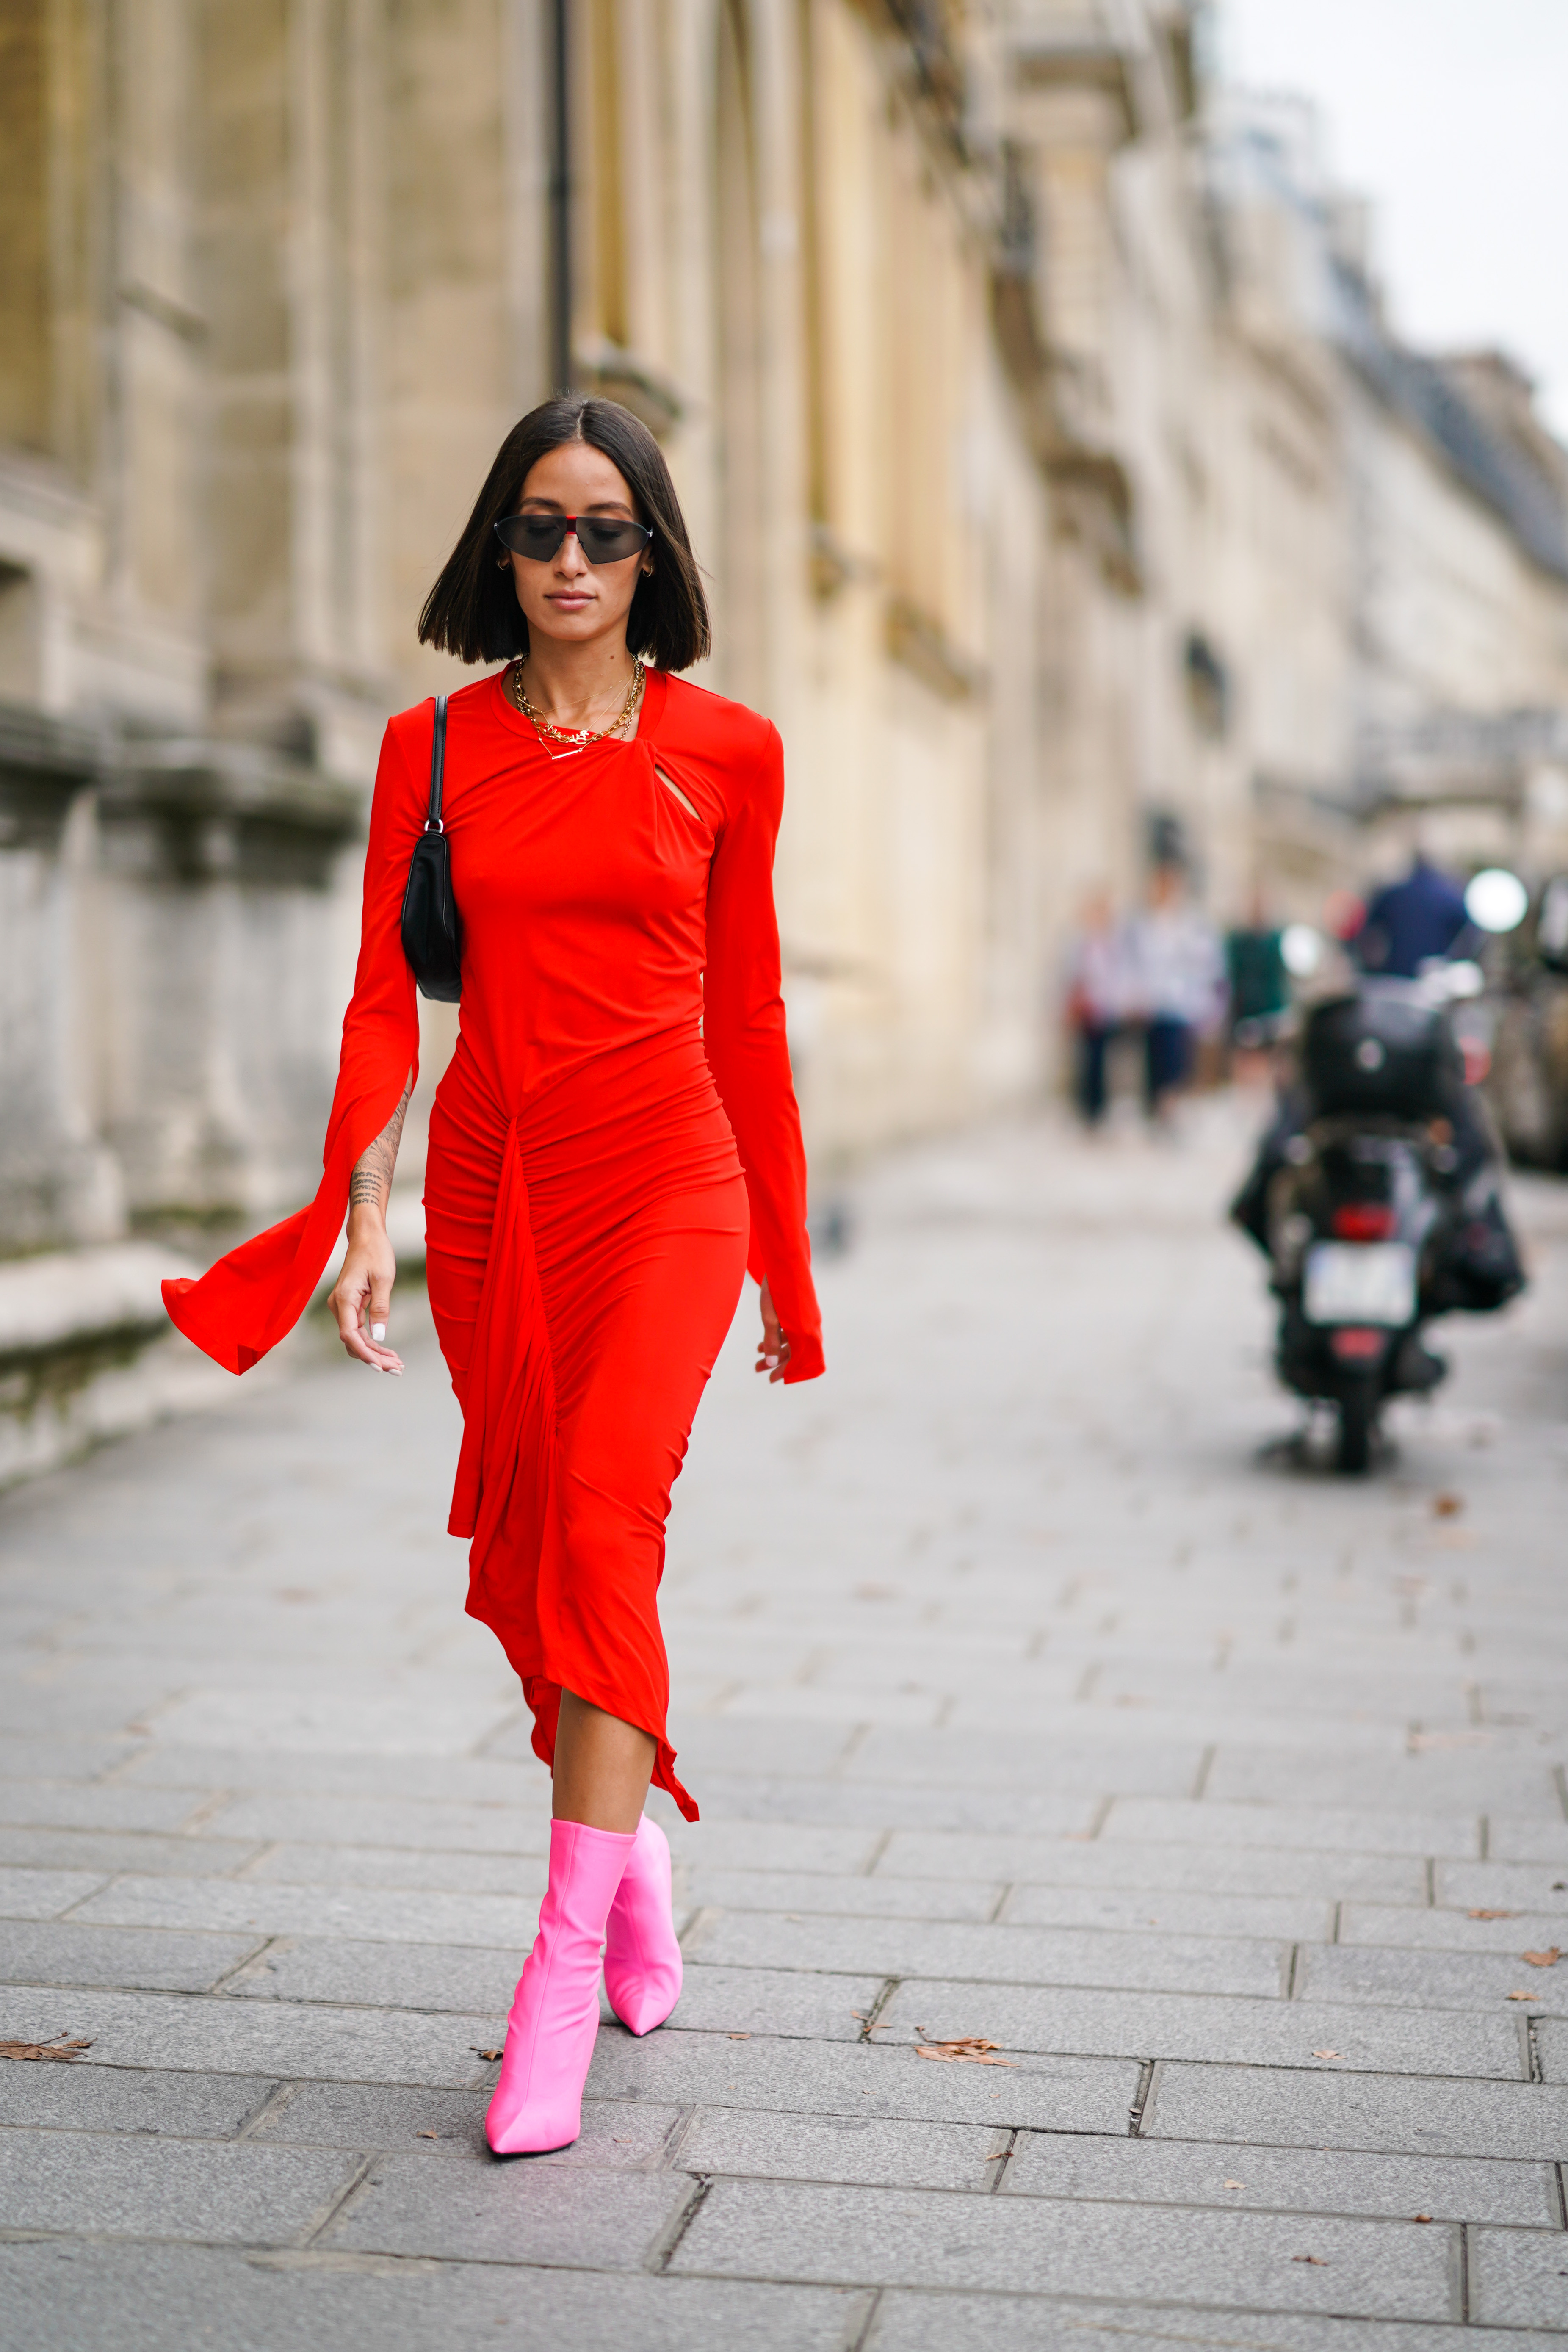 Get Head Over Heels: How to Rock Pink & Red This Month